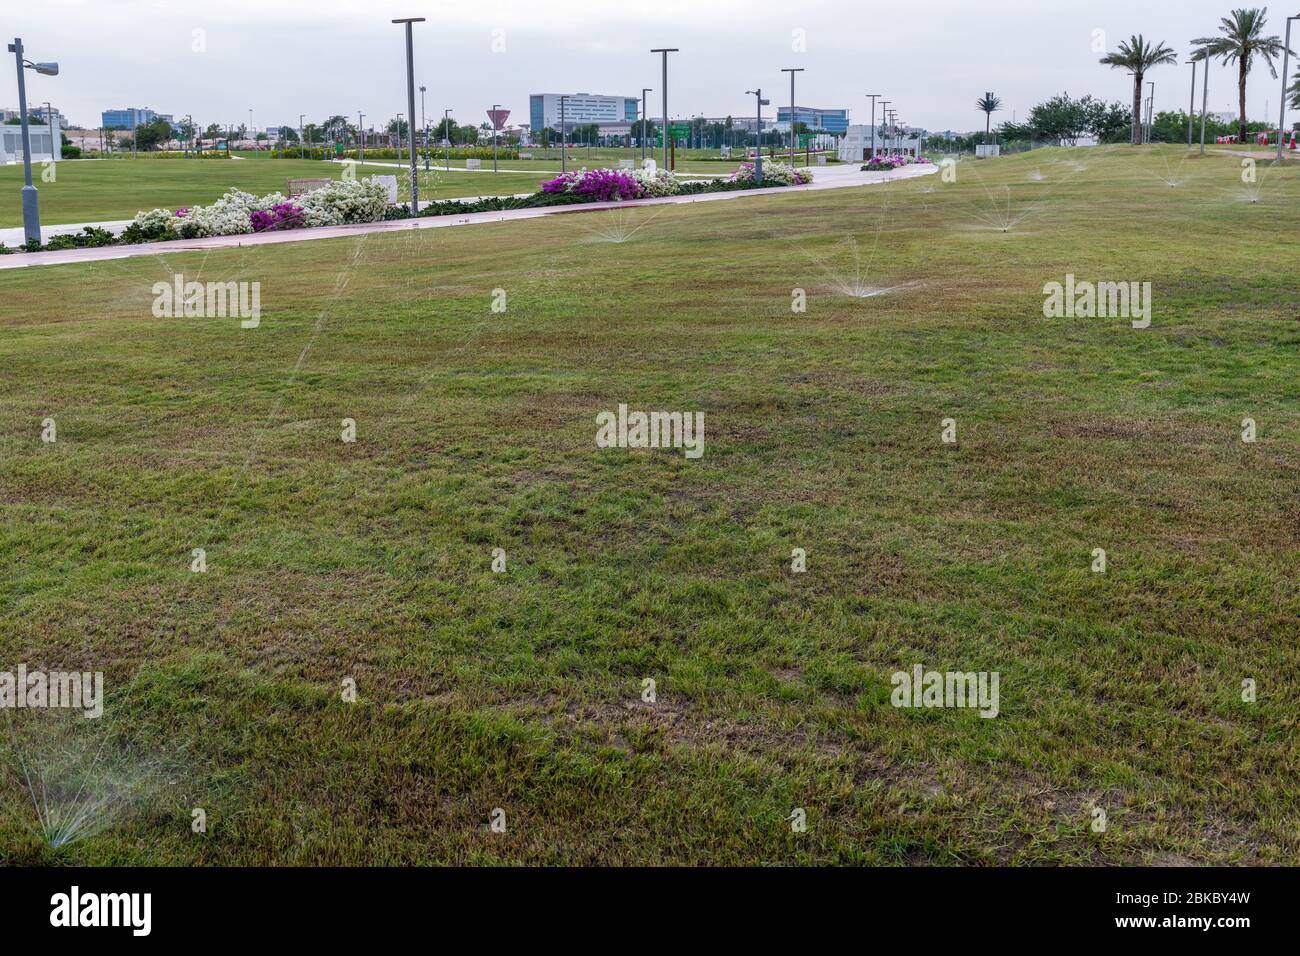 Outdoor lawn with watering system in Doha, Qatar Stock Photo